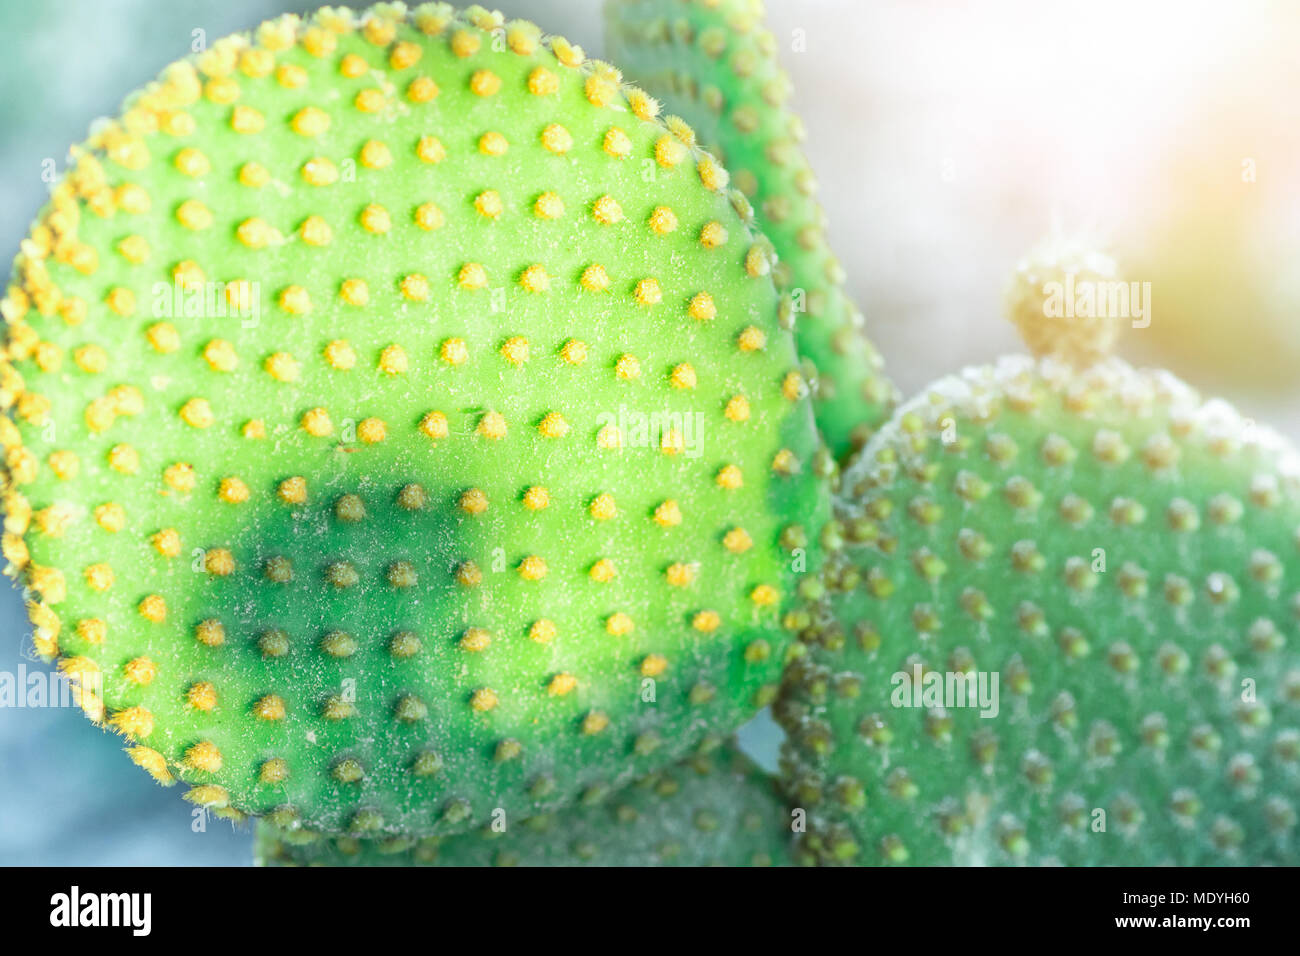 Tropical Natur Background. Opuntia Microdasys Cactus with Round Flat Leaves Growing Outdoors. Soft Pastel Daylight Sun Flare. Beautiful Natural Patter Stock Photo